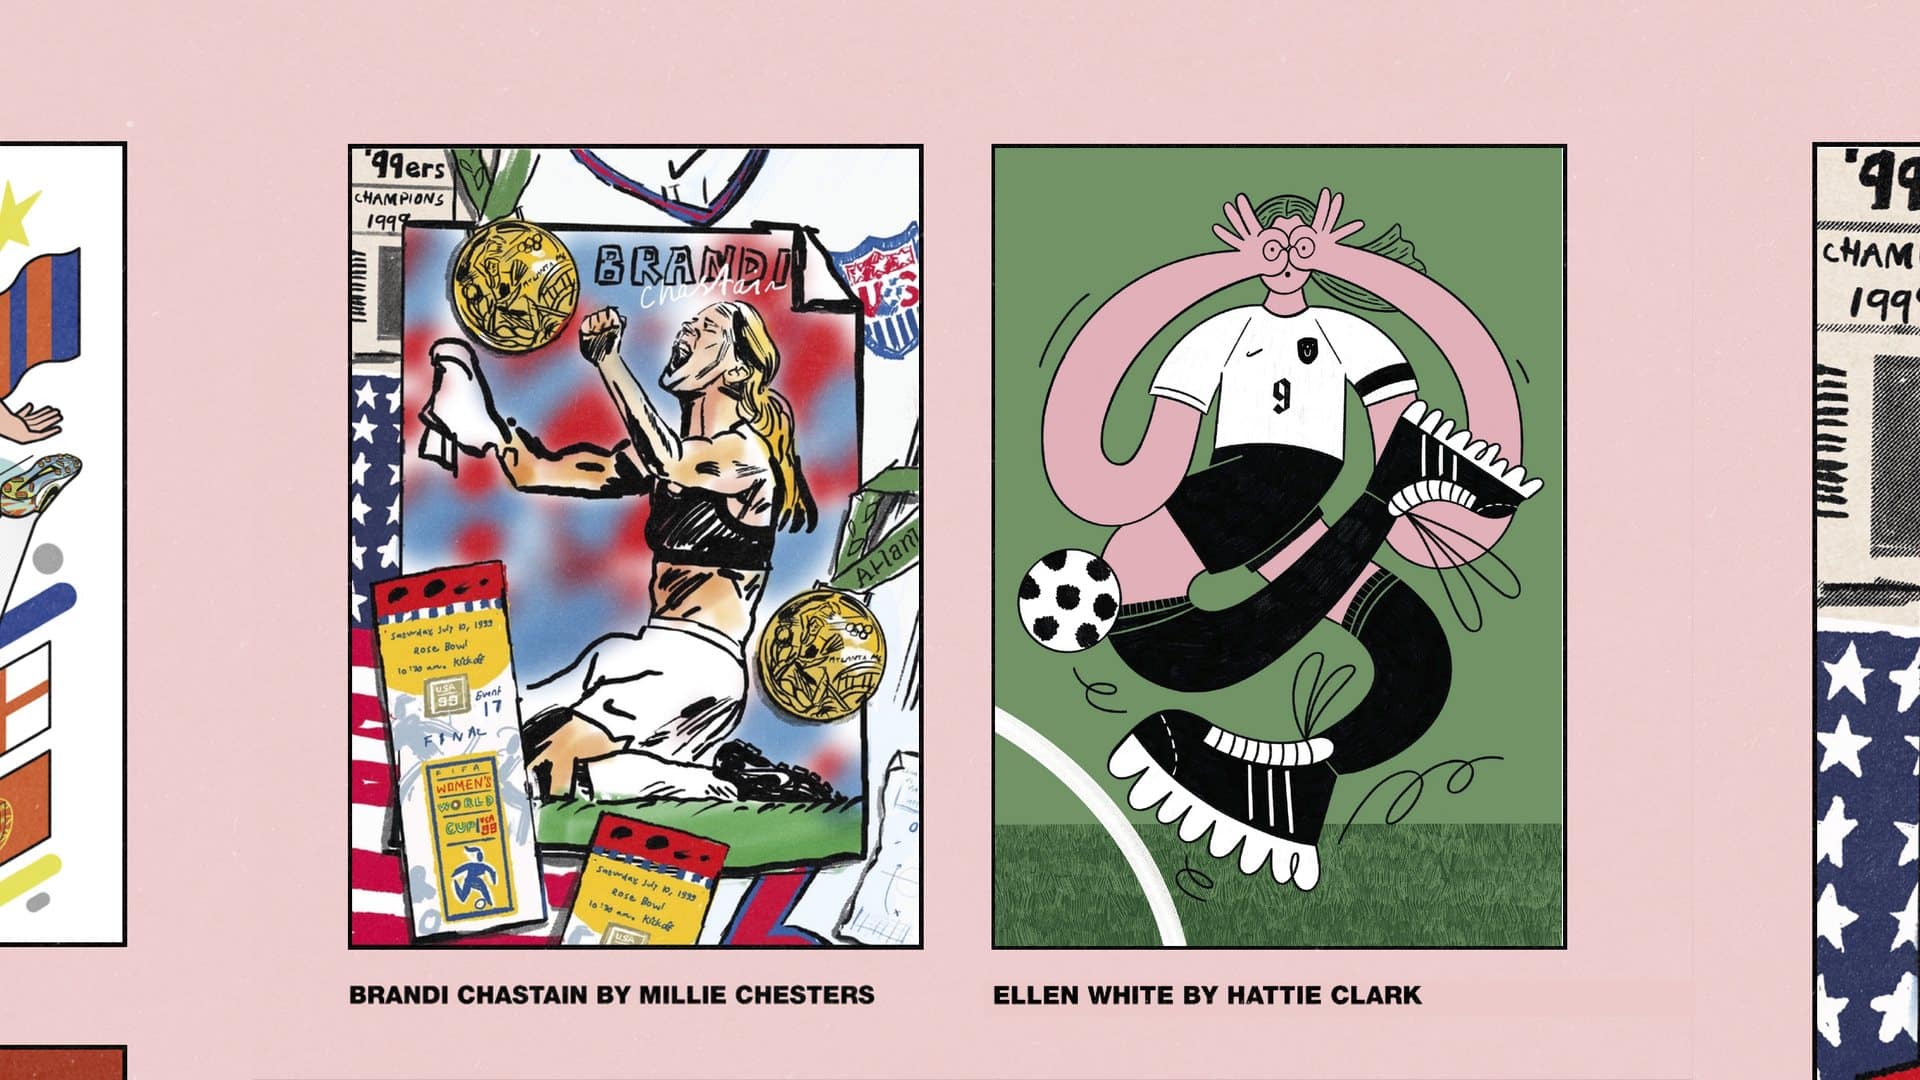 Illustrations from the Forward Play exhibition featuring Brandi Chastain by Mille Chesters and Ellen White by Hattie Clark